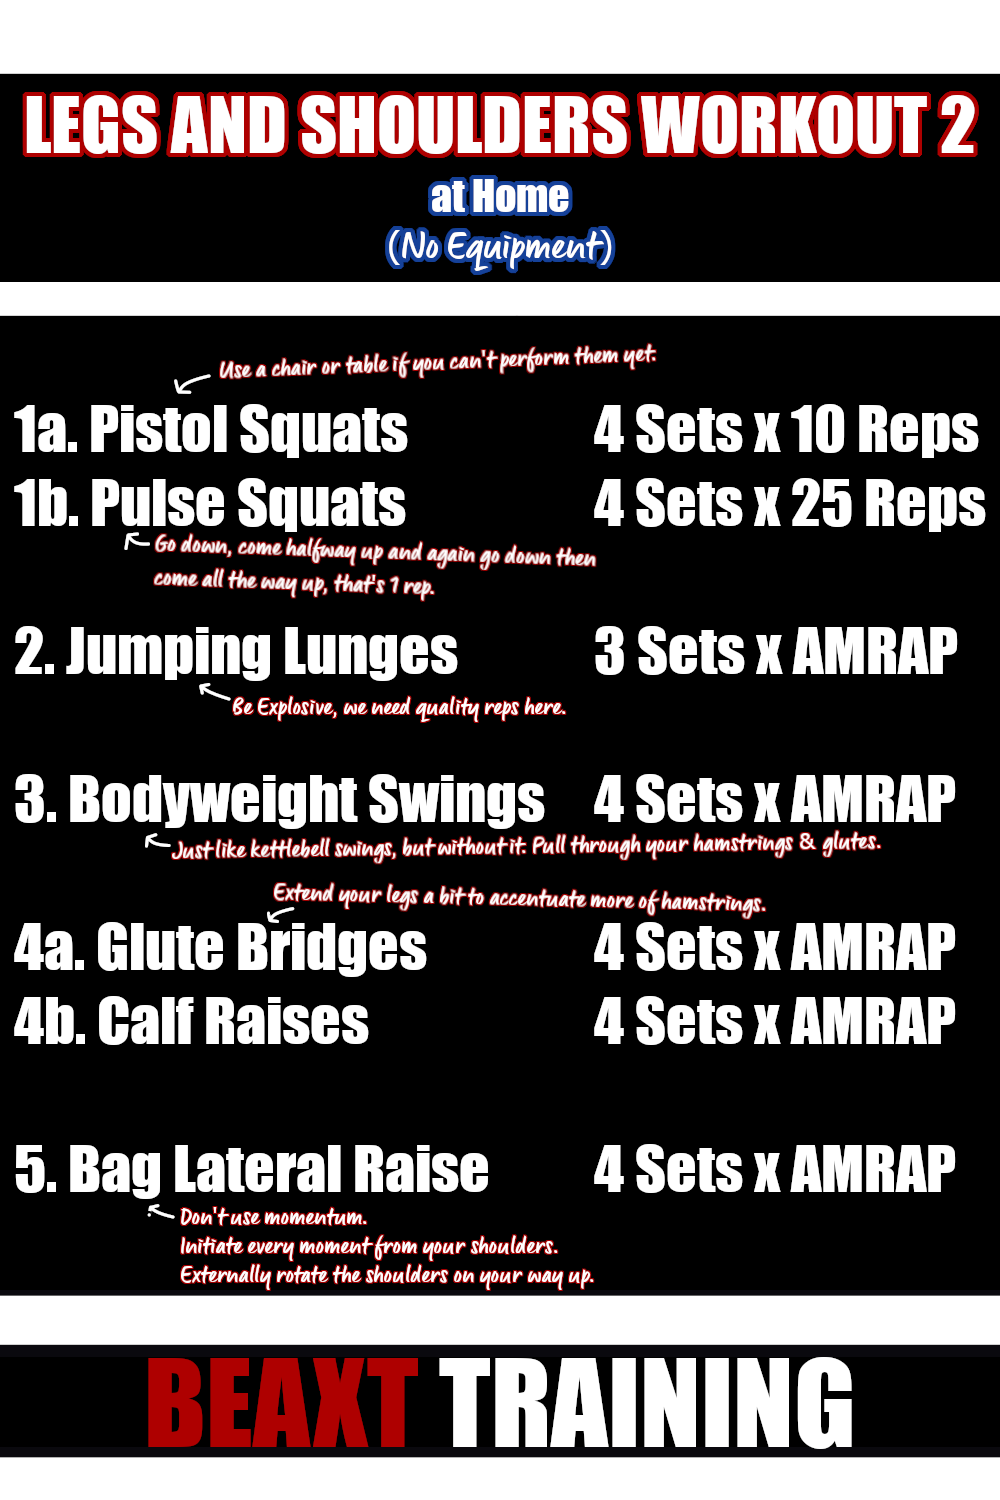 Legs and Shoulders Workout 2 at home without equipment